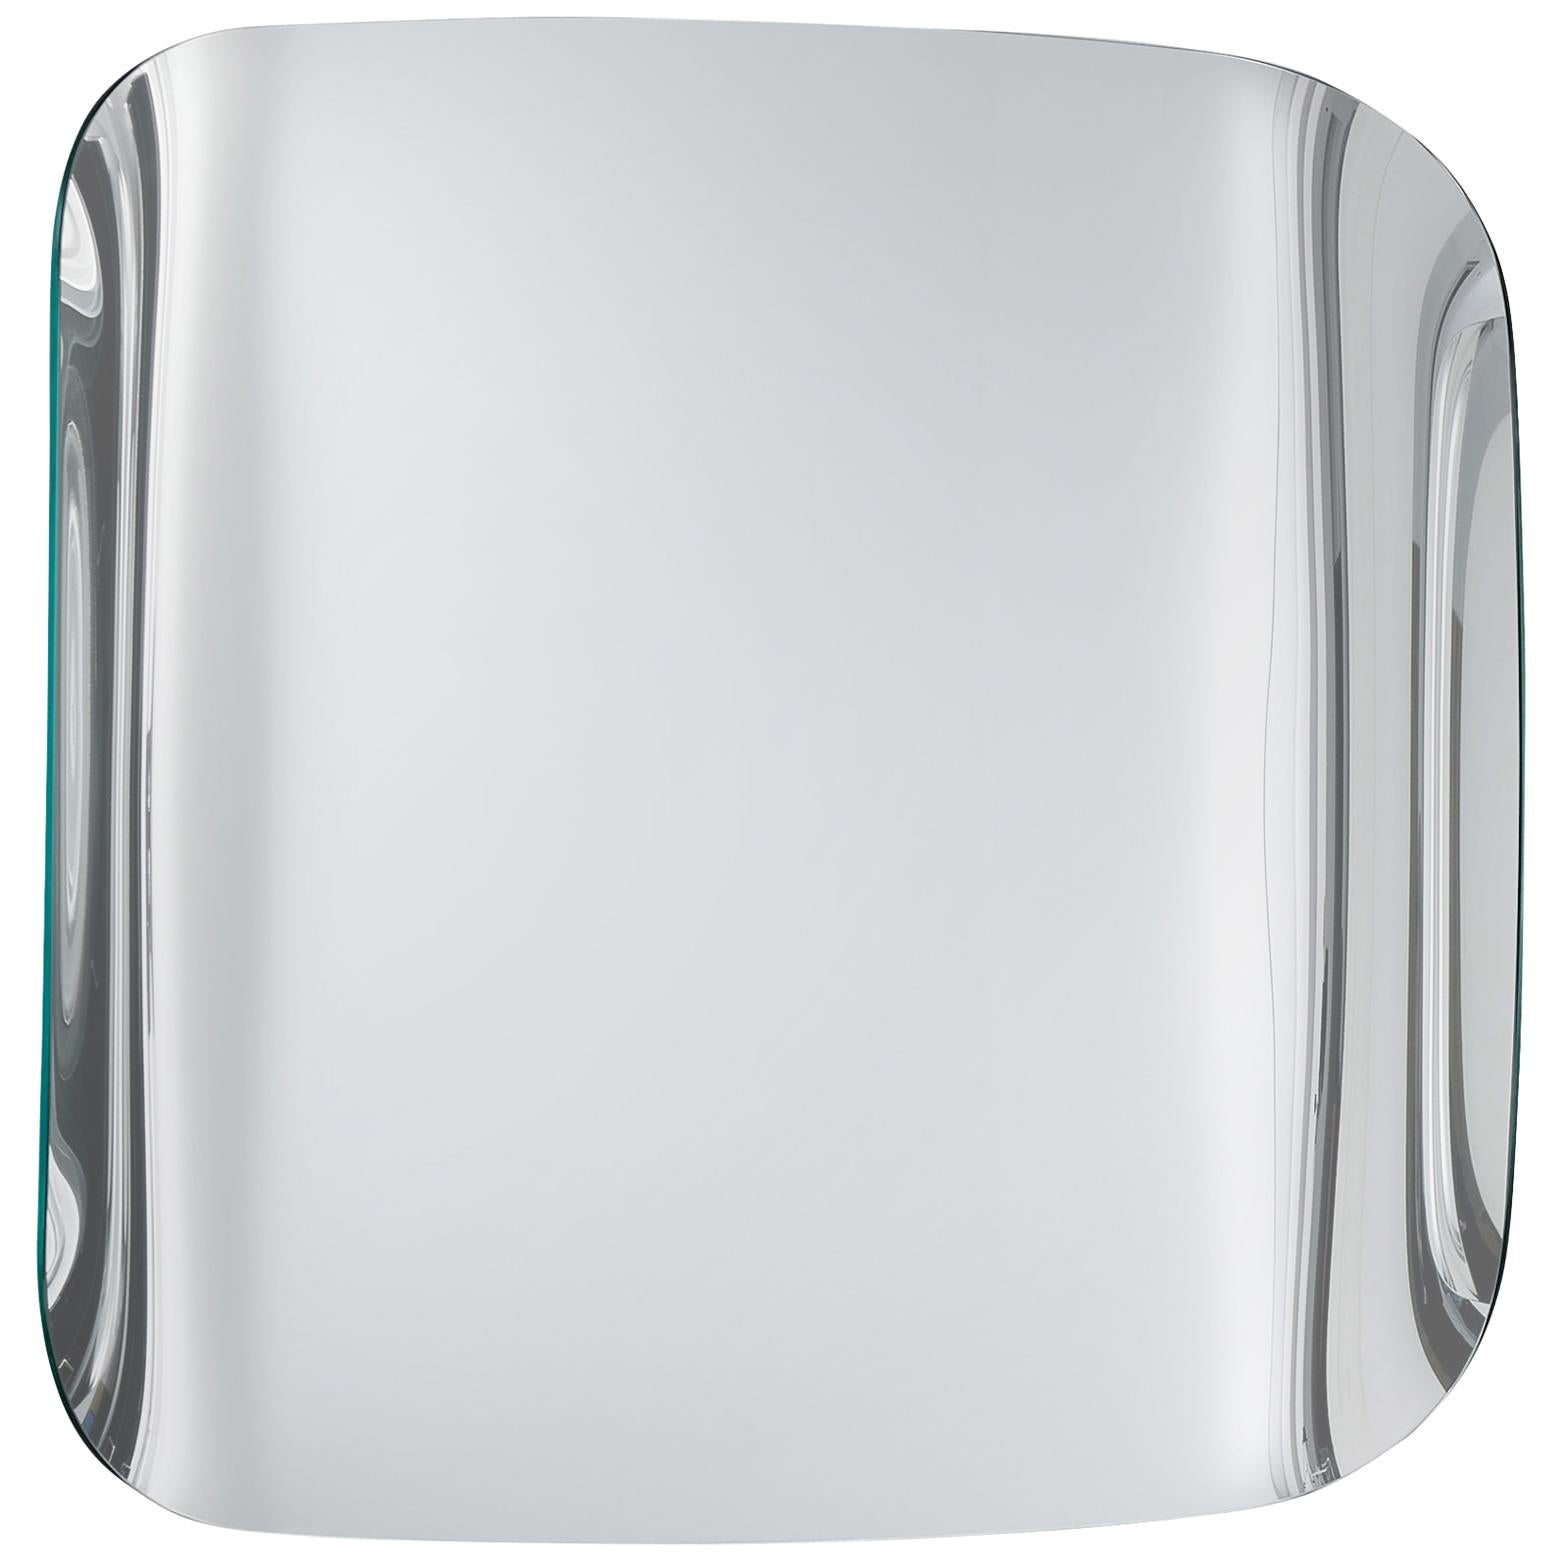 MARLENE Square Wall Mirror, by Philippe Starck with S. Schito for Glas Italia